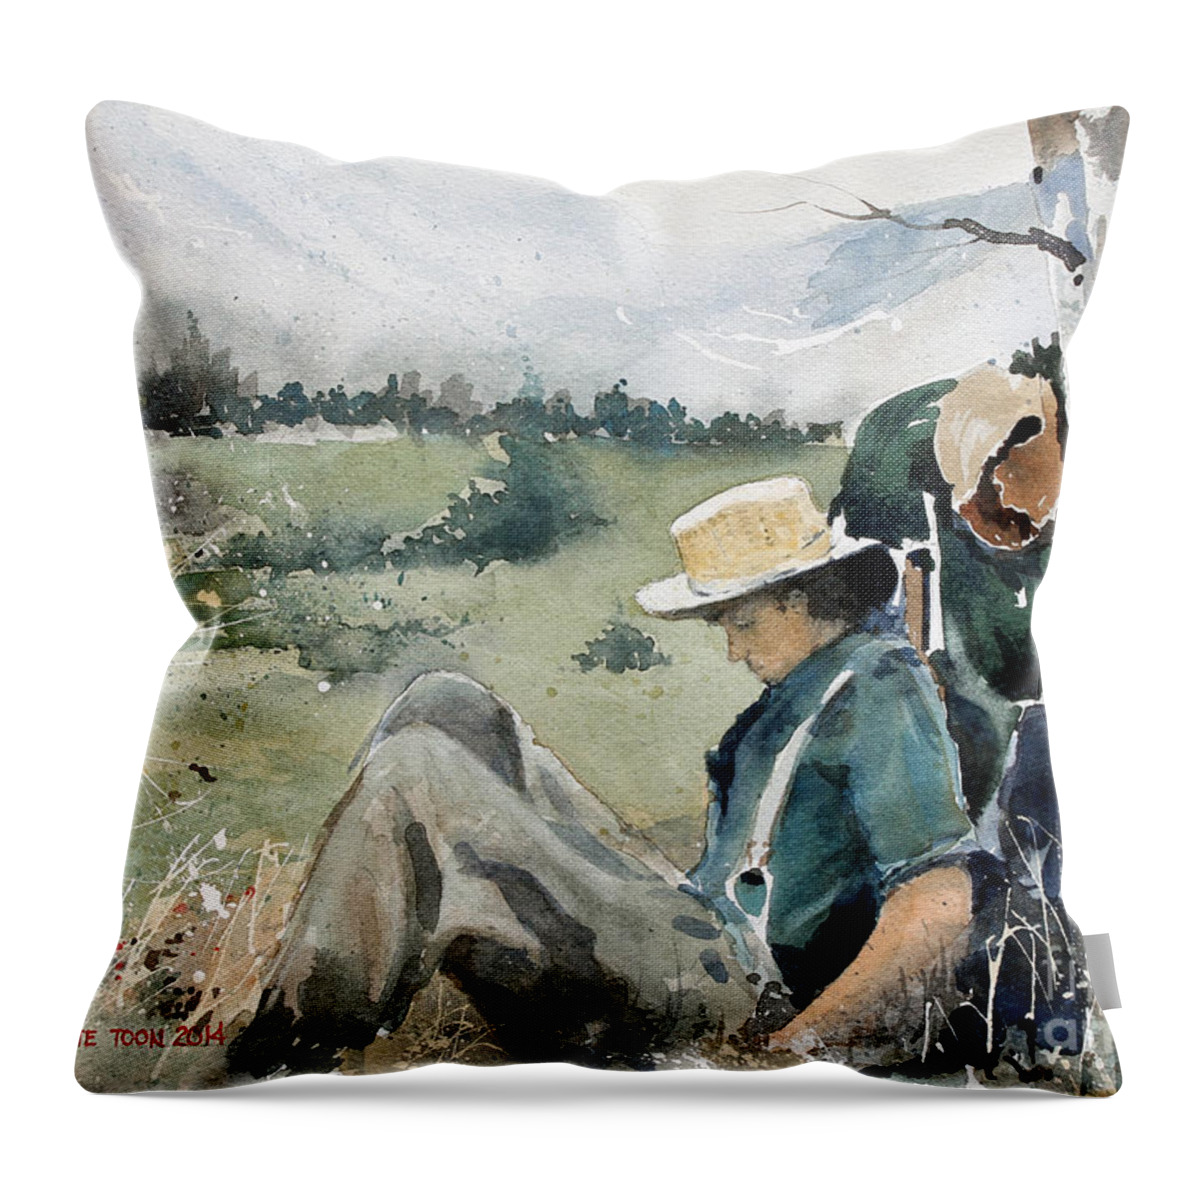 A Young Backpacker Takes A Brief Nap During His Trek Through The Rocky Mountains. Throw Pillow featuring the painting High Country Rest Stop by Monte Toon